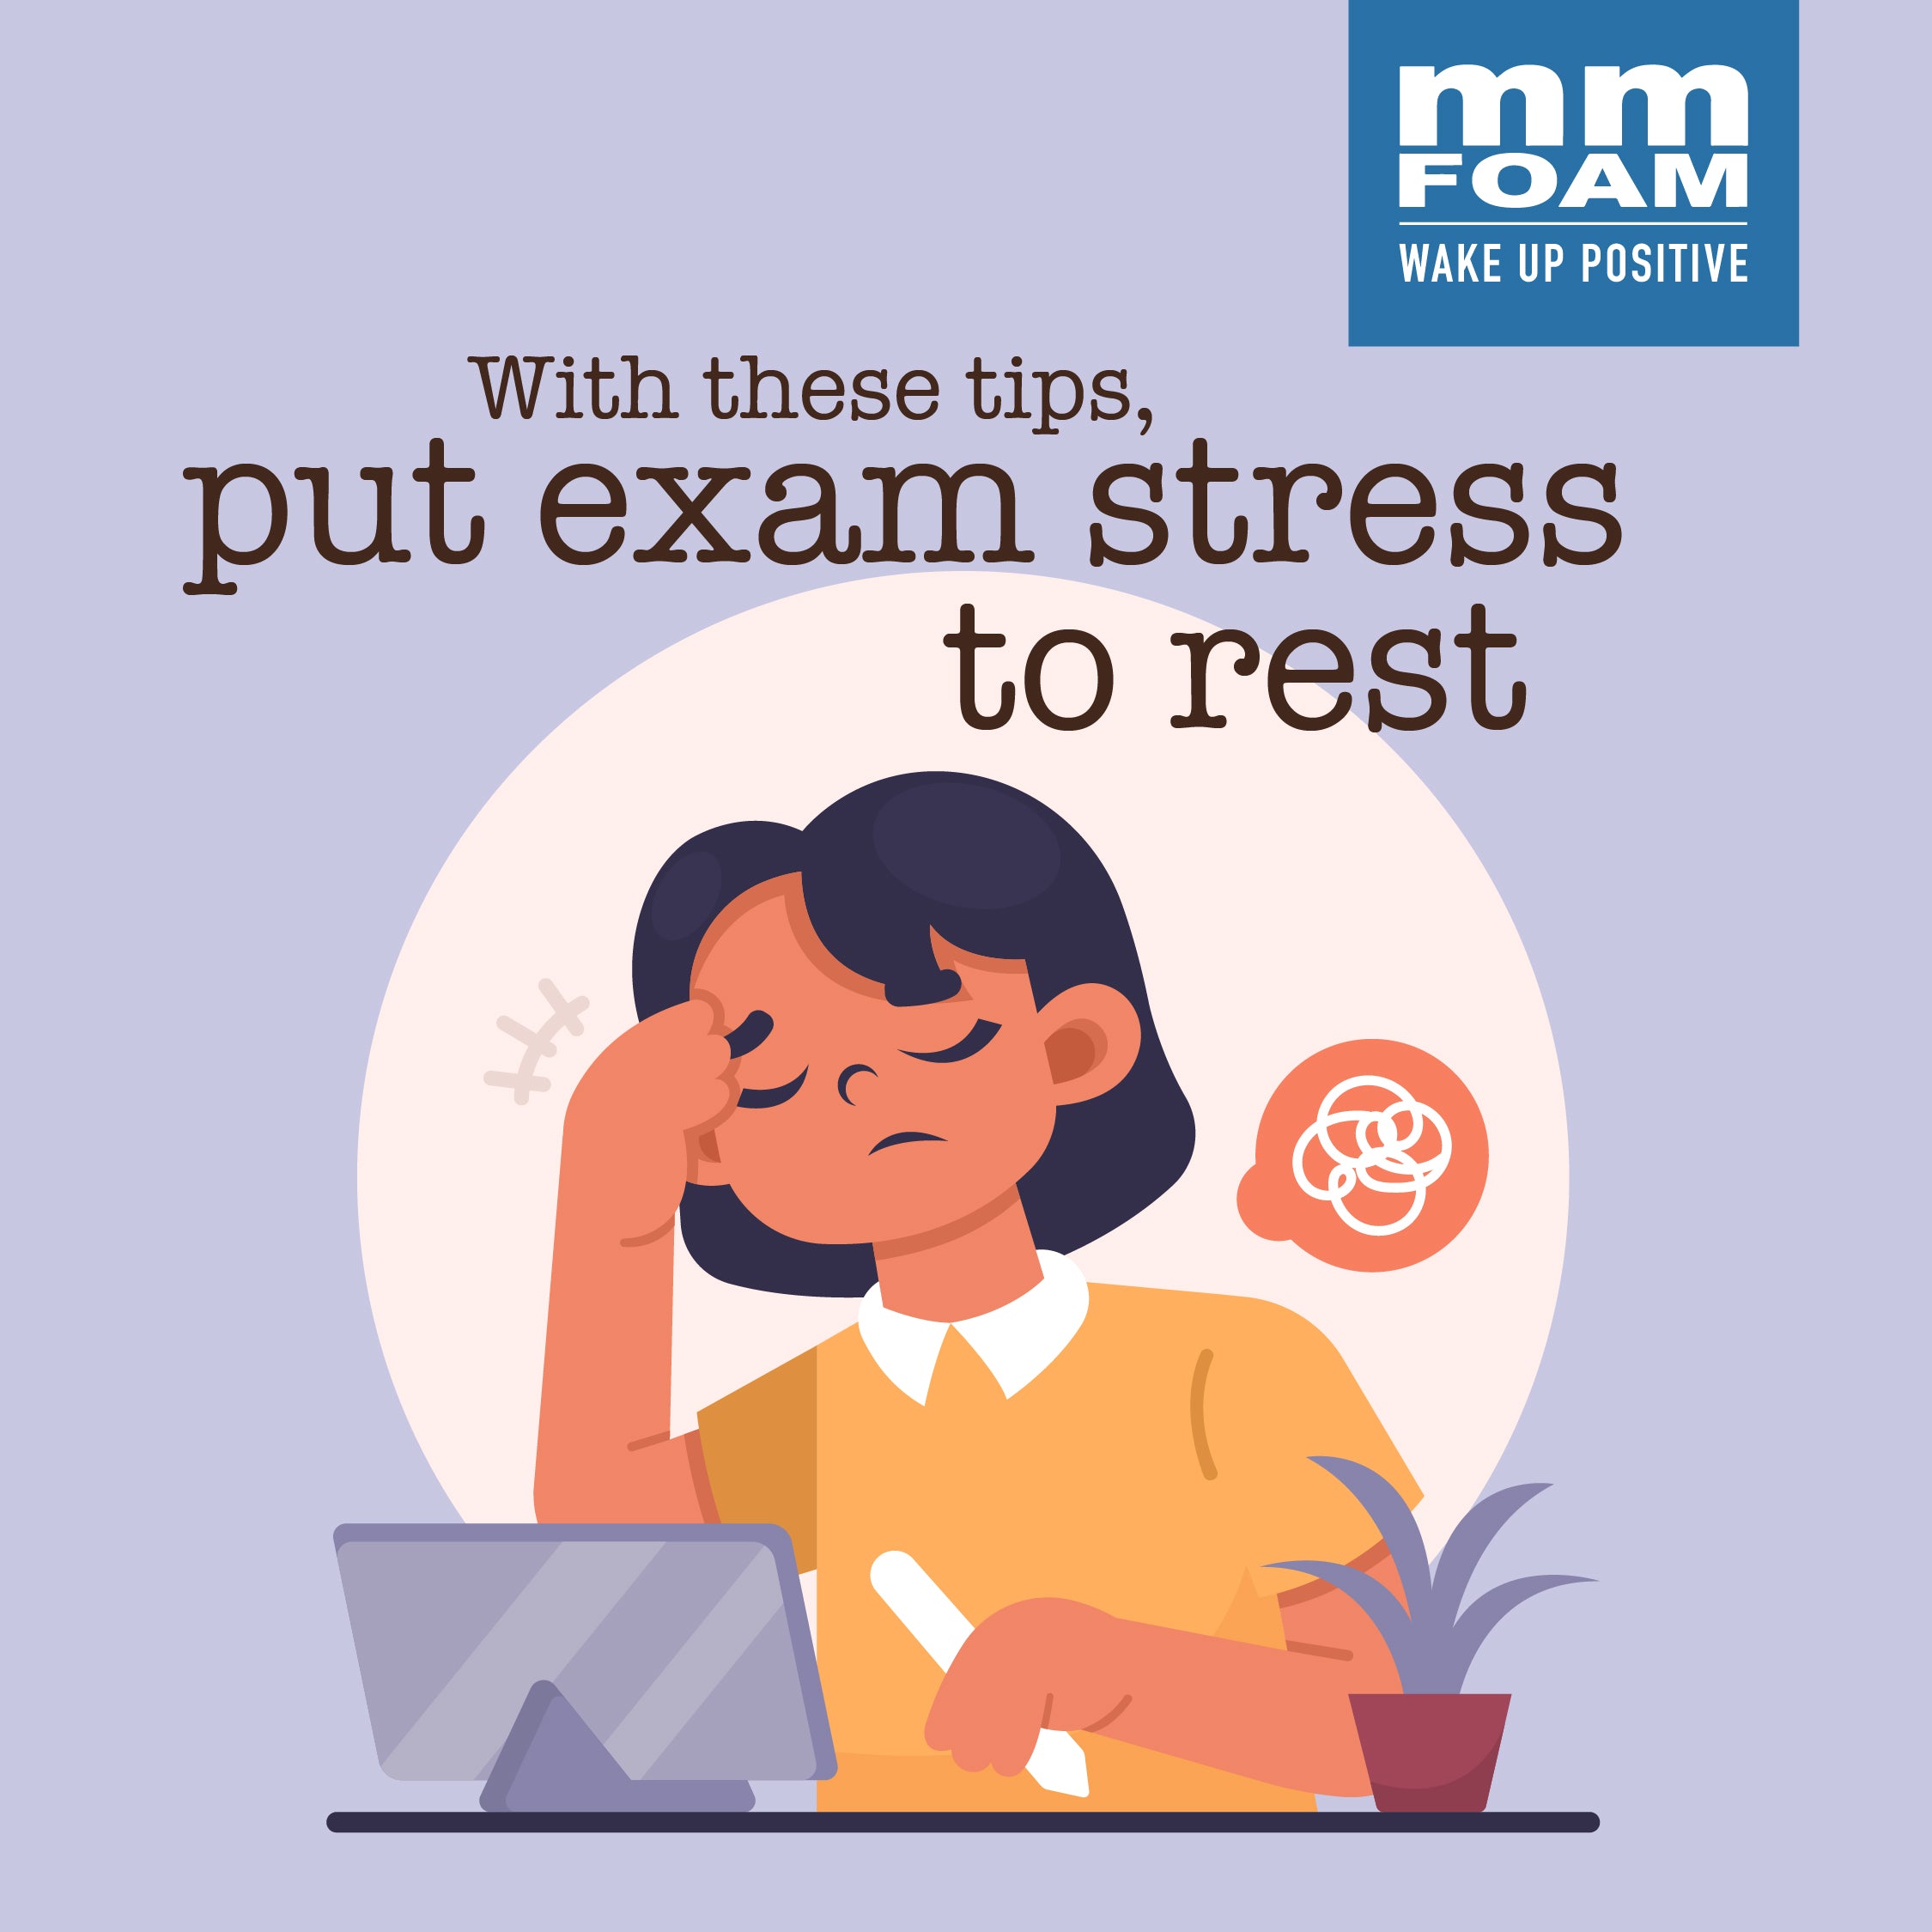 Not sleeping well due to exam stress. Try these tips to sleep better.